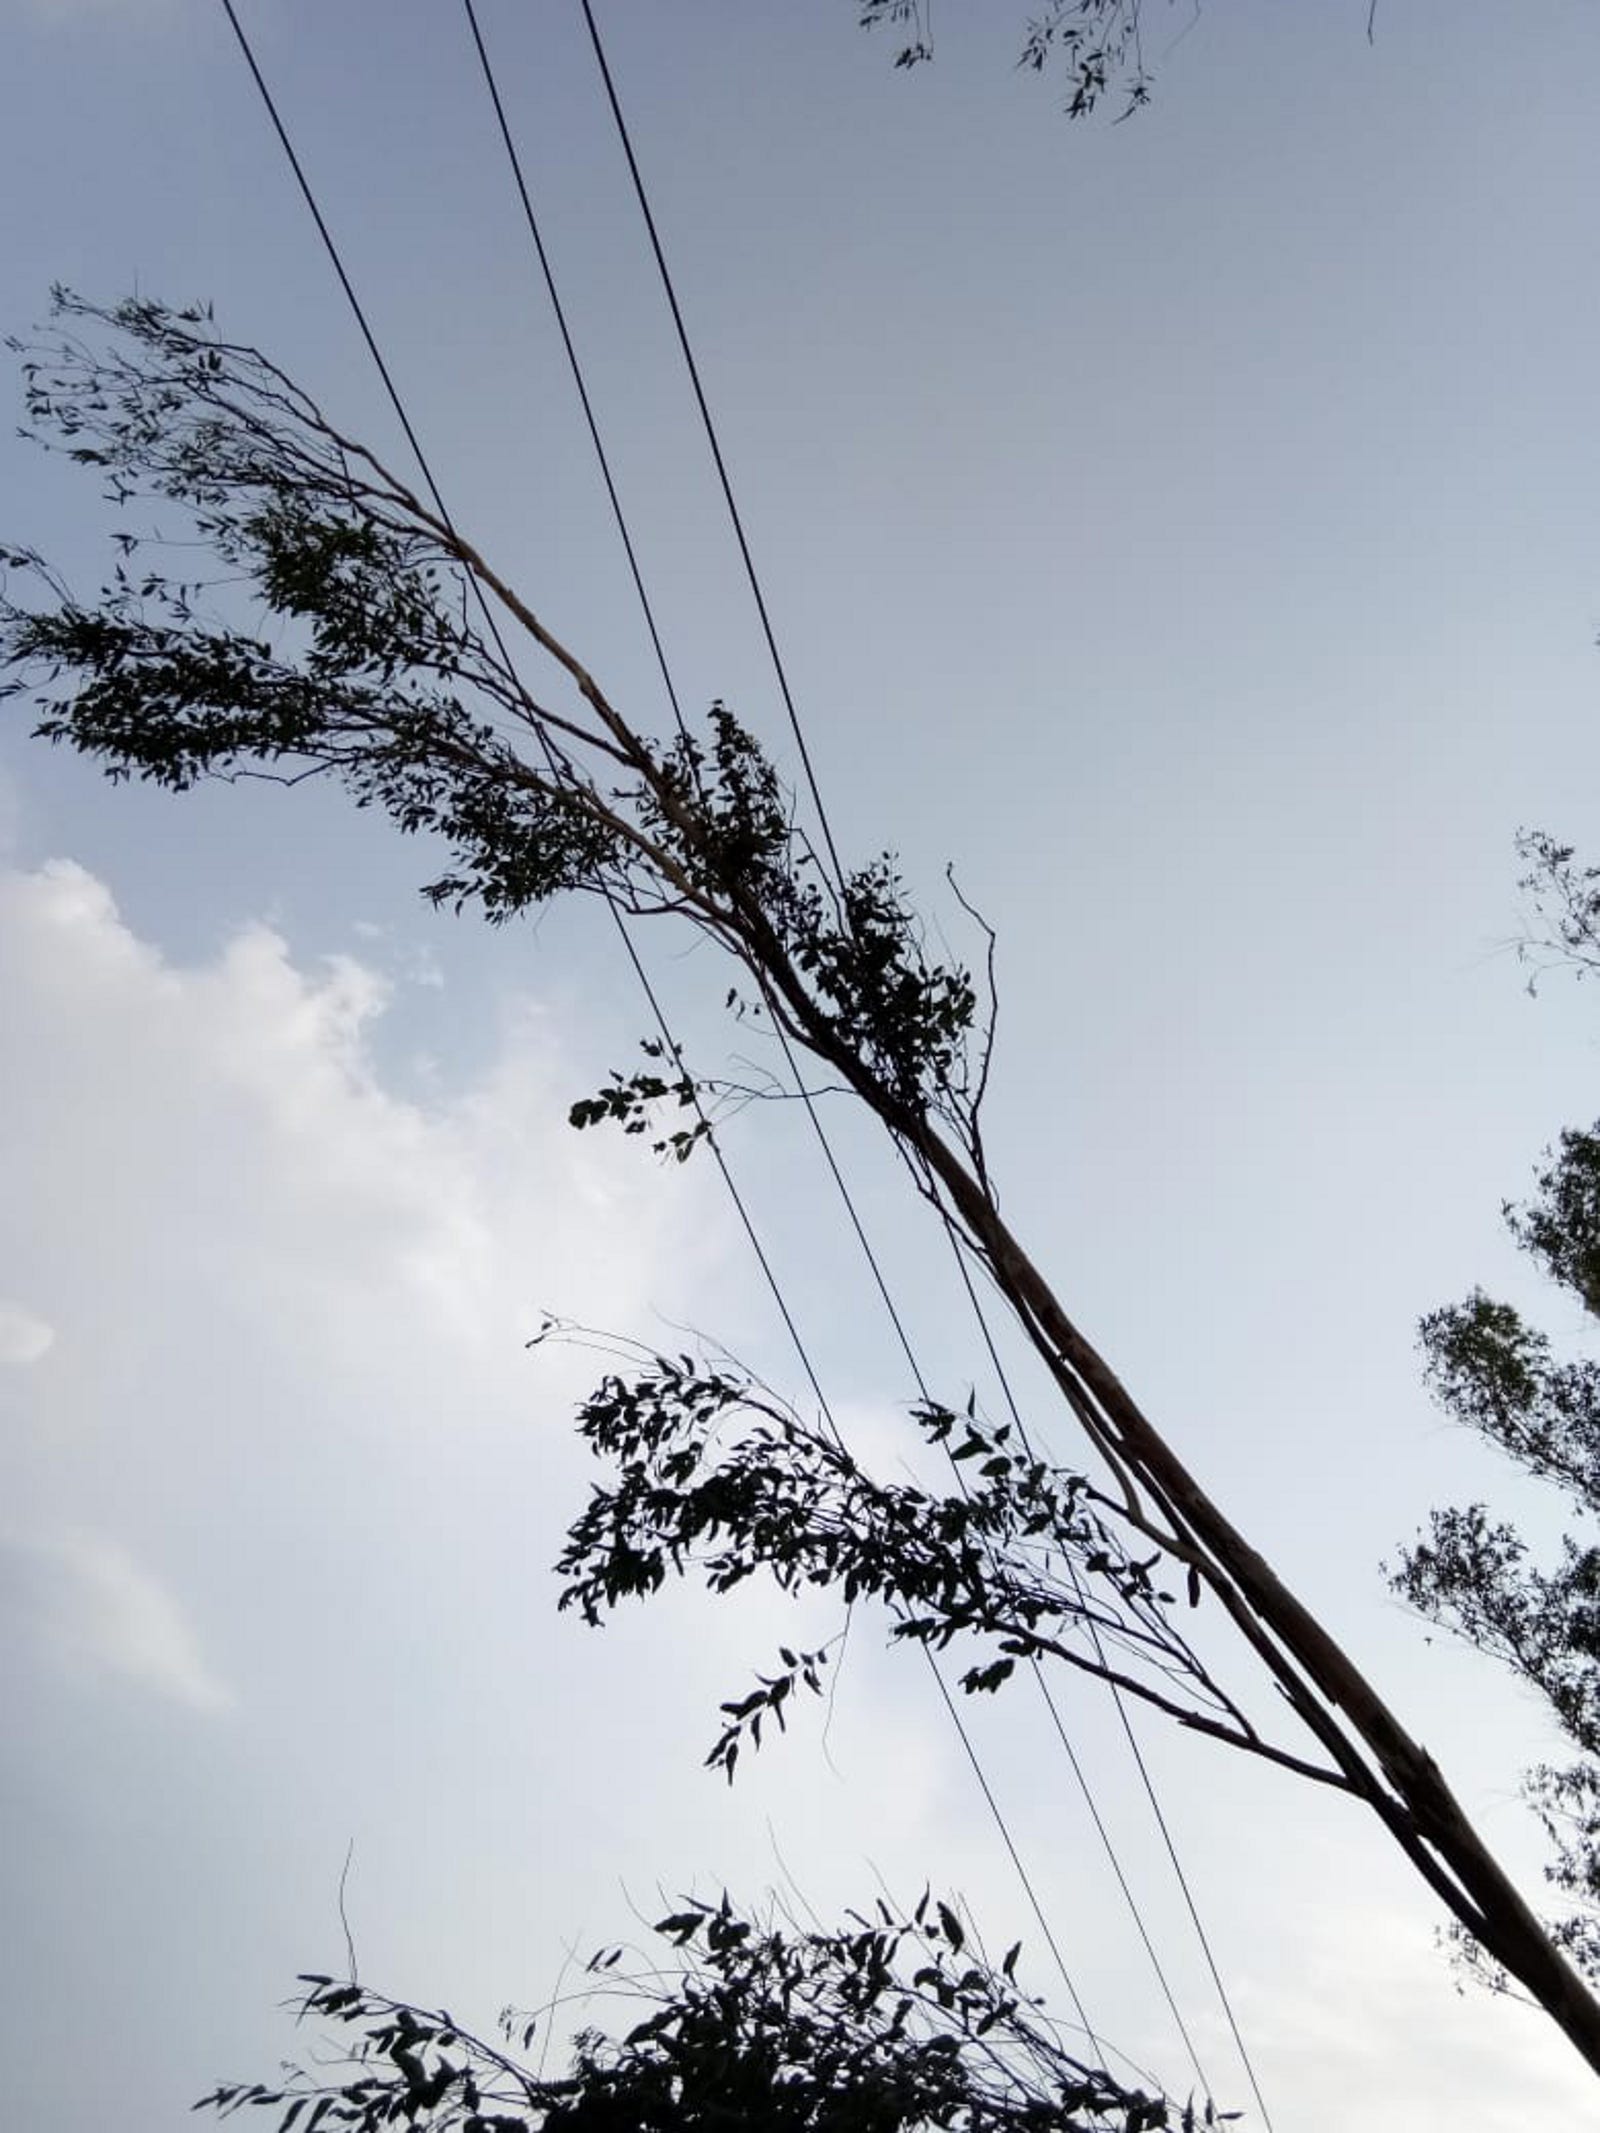 Trees cut down on hittion line, power supply for two hours, complaint